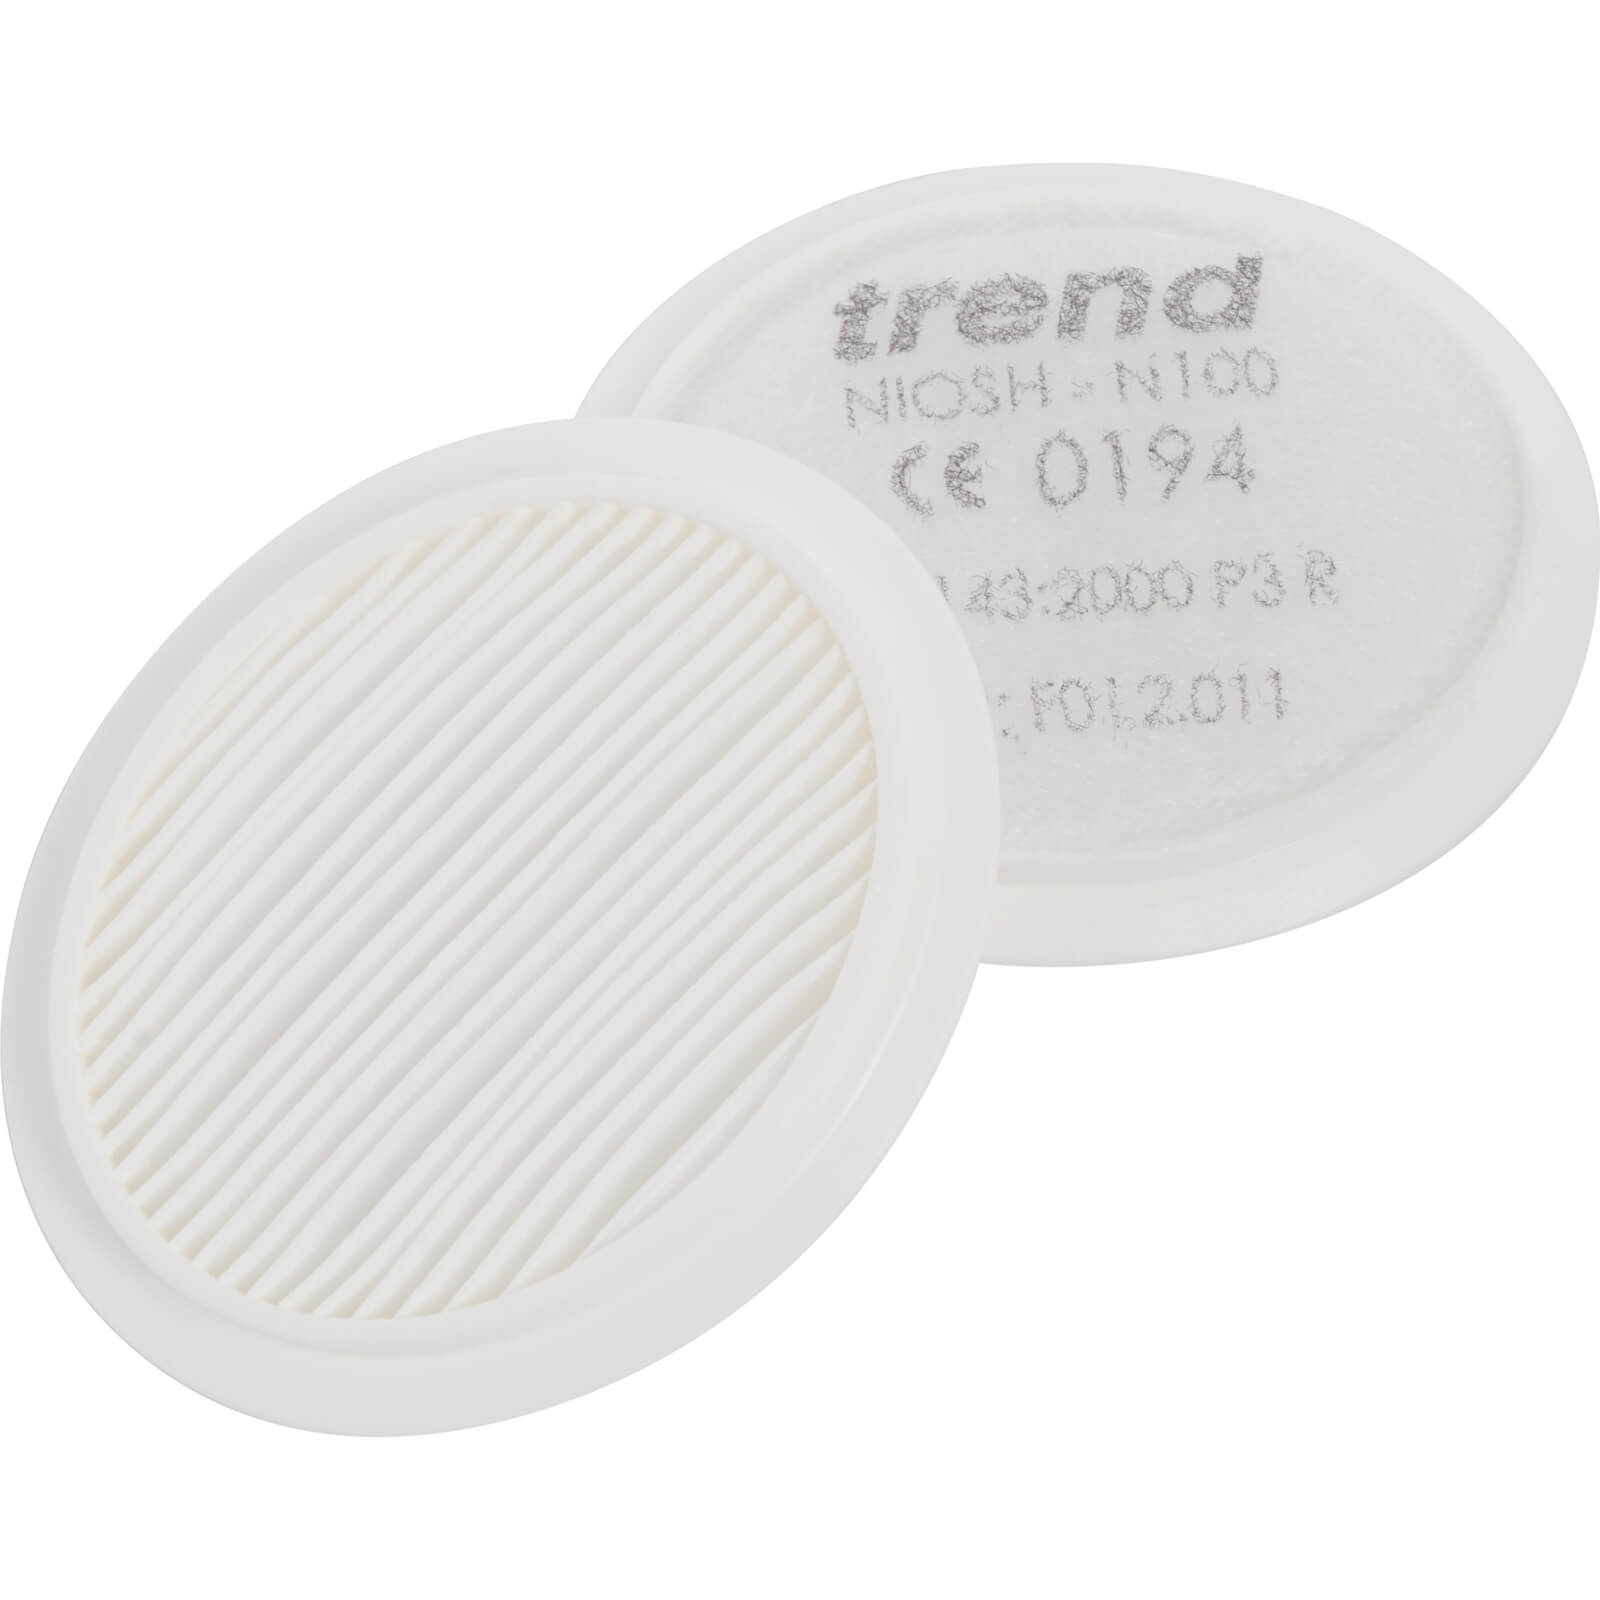 Photos - Medical Mask / Respirator Trend Air Stealth P3 Replacement Filter Pack of 5 STEALTH/1/5 